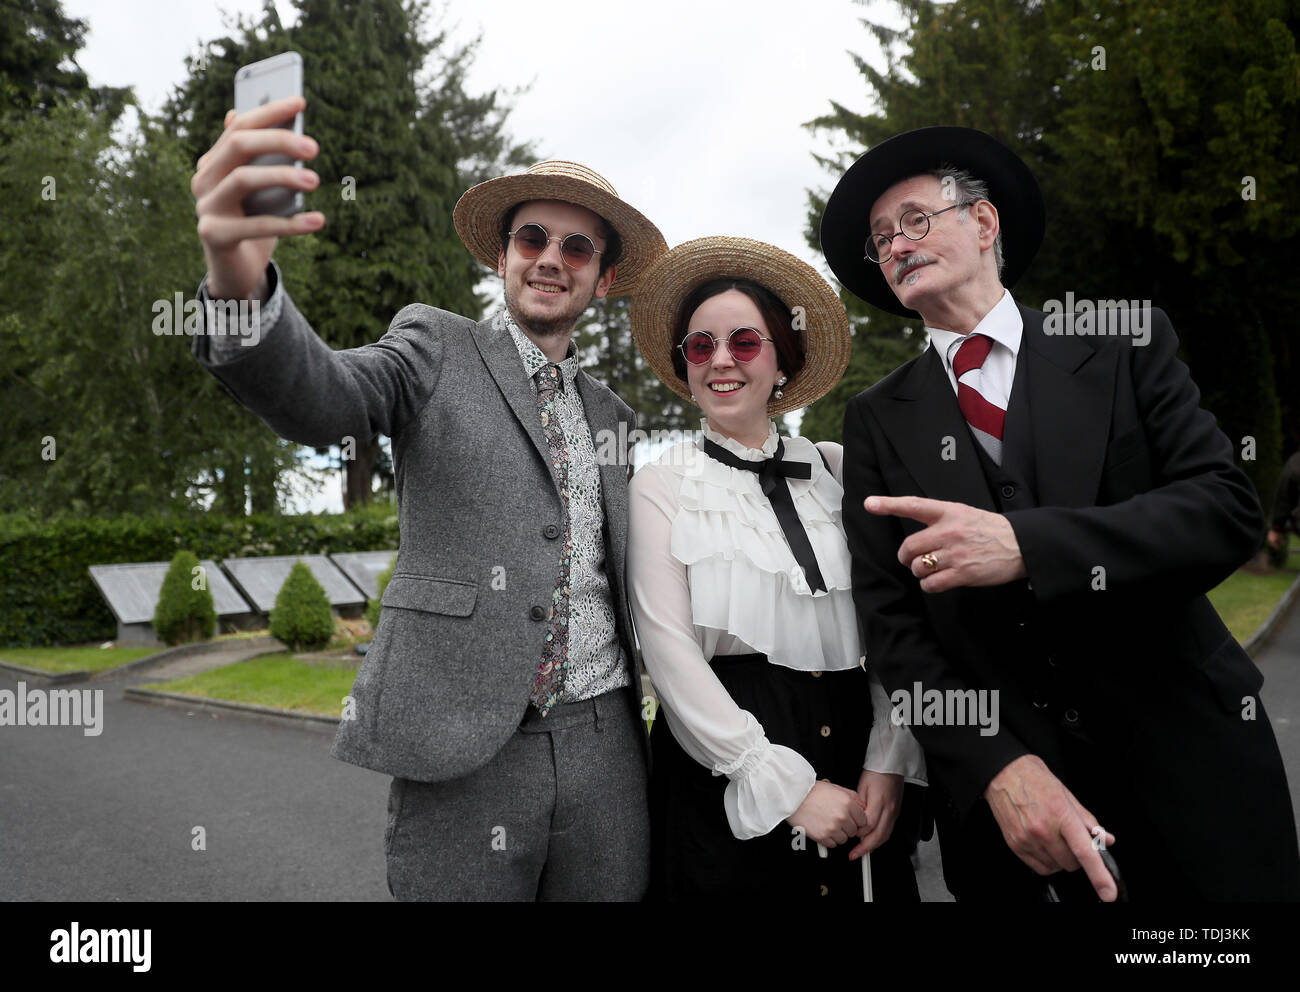 Failan O'Mahoney, from Rathgar, and Roisin Byrne, from Phibsboro, pose for a selfie with James Joyce lookalike John Shevlin, at the annual Bloomsday event at Glasnevin Cemetery, Dublin, featuring a reenactment from the 'Hades' chapter of James Joyce's Ulysses. Stock Photo